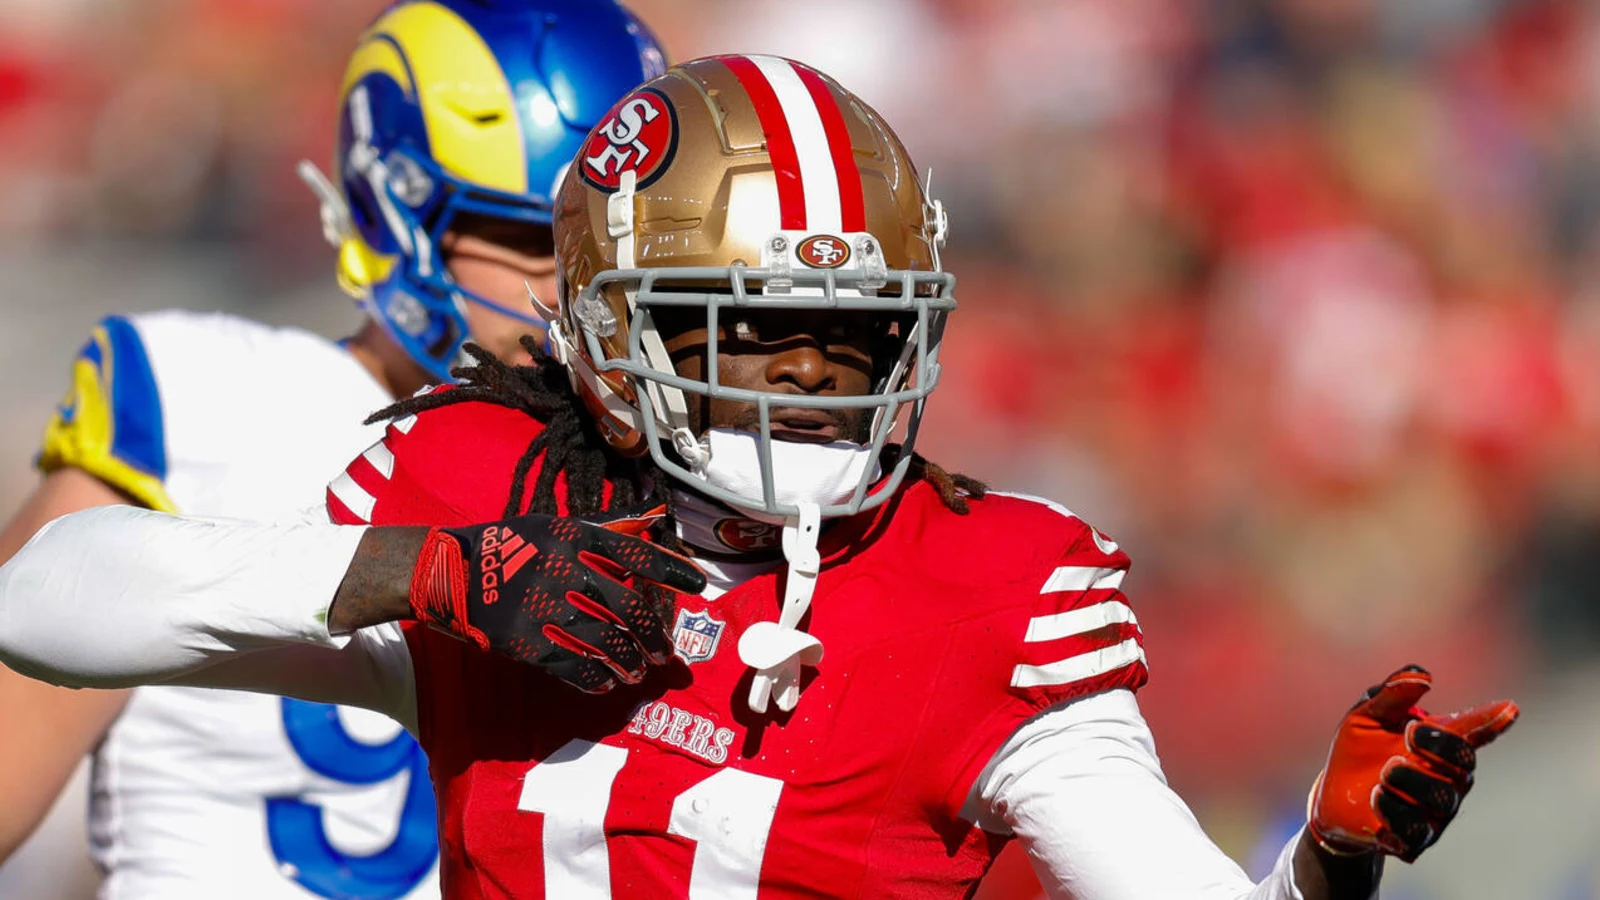 Brandon Aiyuk's Standoff with 49ers: A Tug of War Over Value and Vision